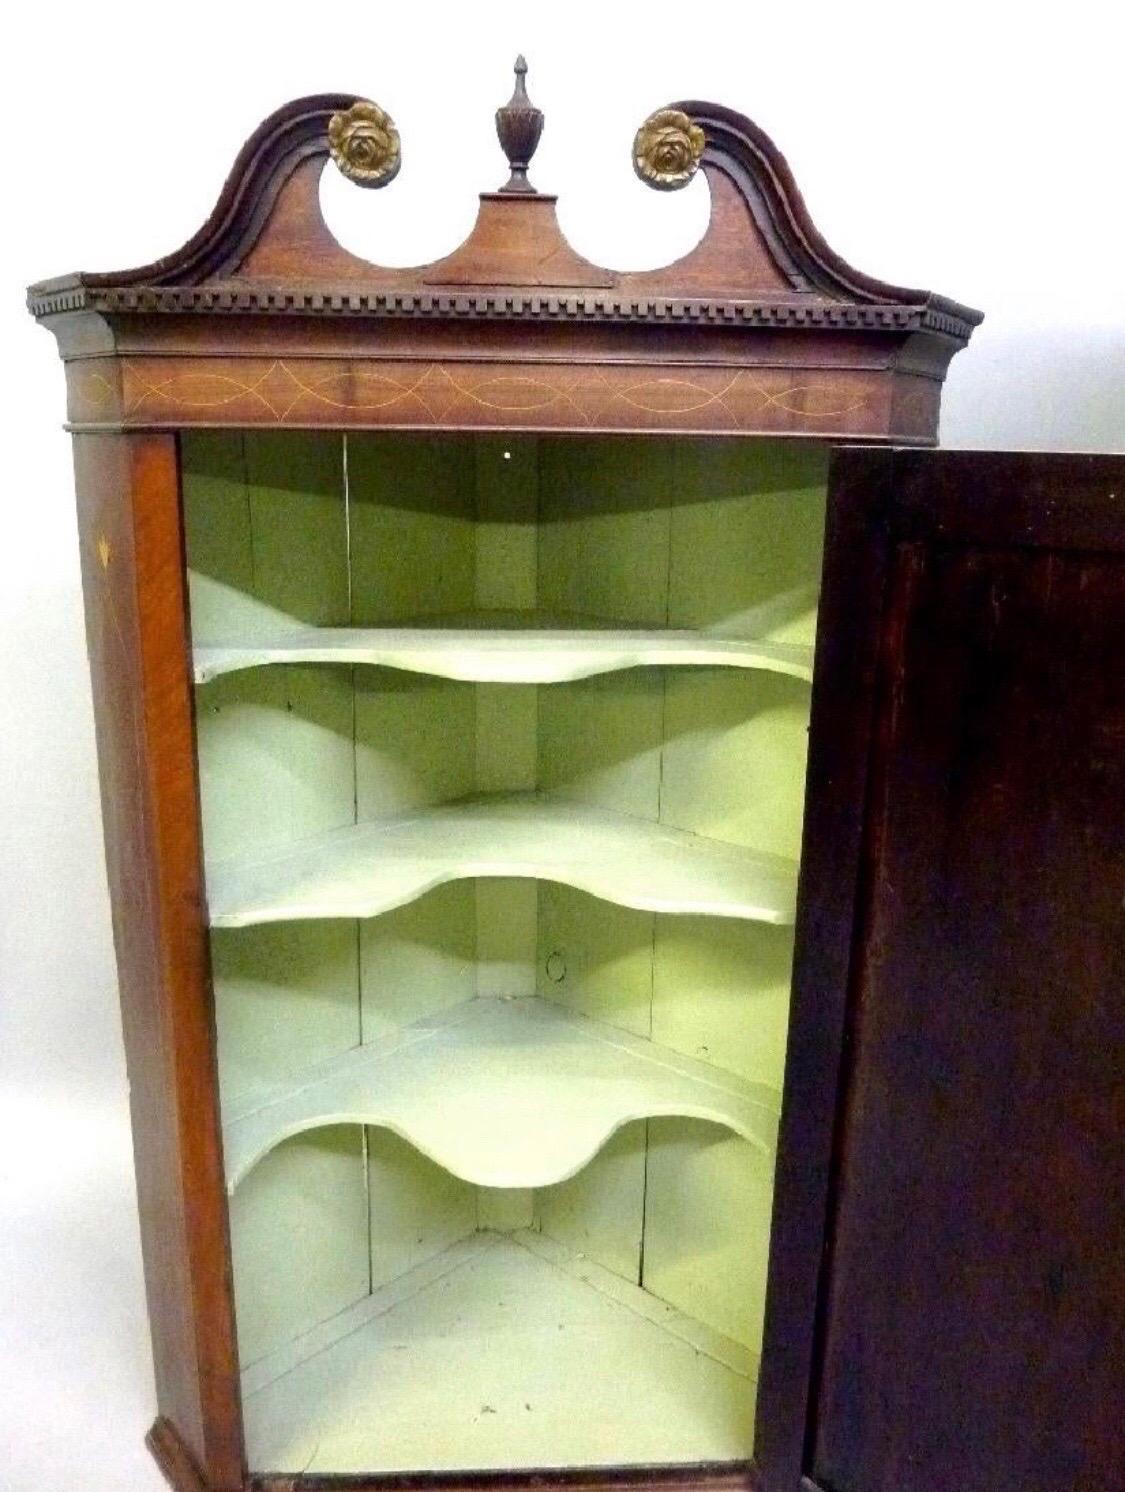 Late 18th-early 19th century Georgian mahogany inlaid hanging corner cabinet with single door, inlay banding and broken pediment cresting with finial. Has great green interior with scalloped shelves inside.
 